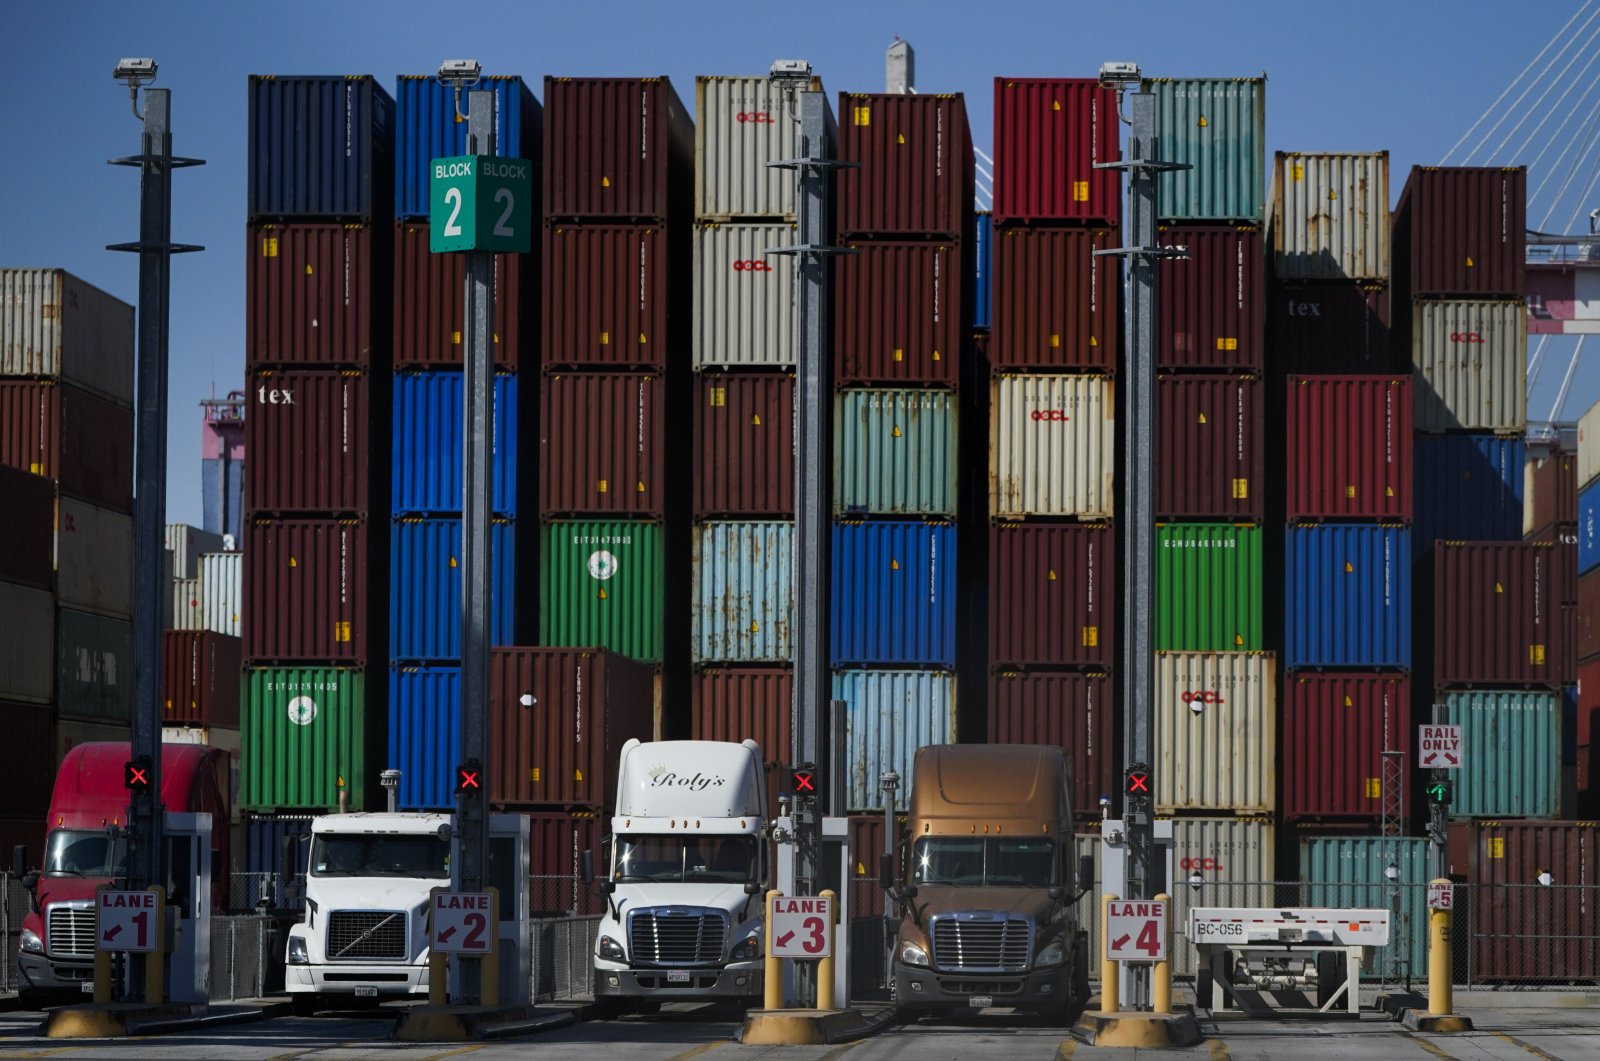 Containers are stacked at the Port of Long Beach, California, U.S., Oct. 1, 2021. (AP File Photo)